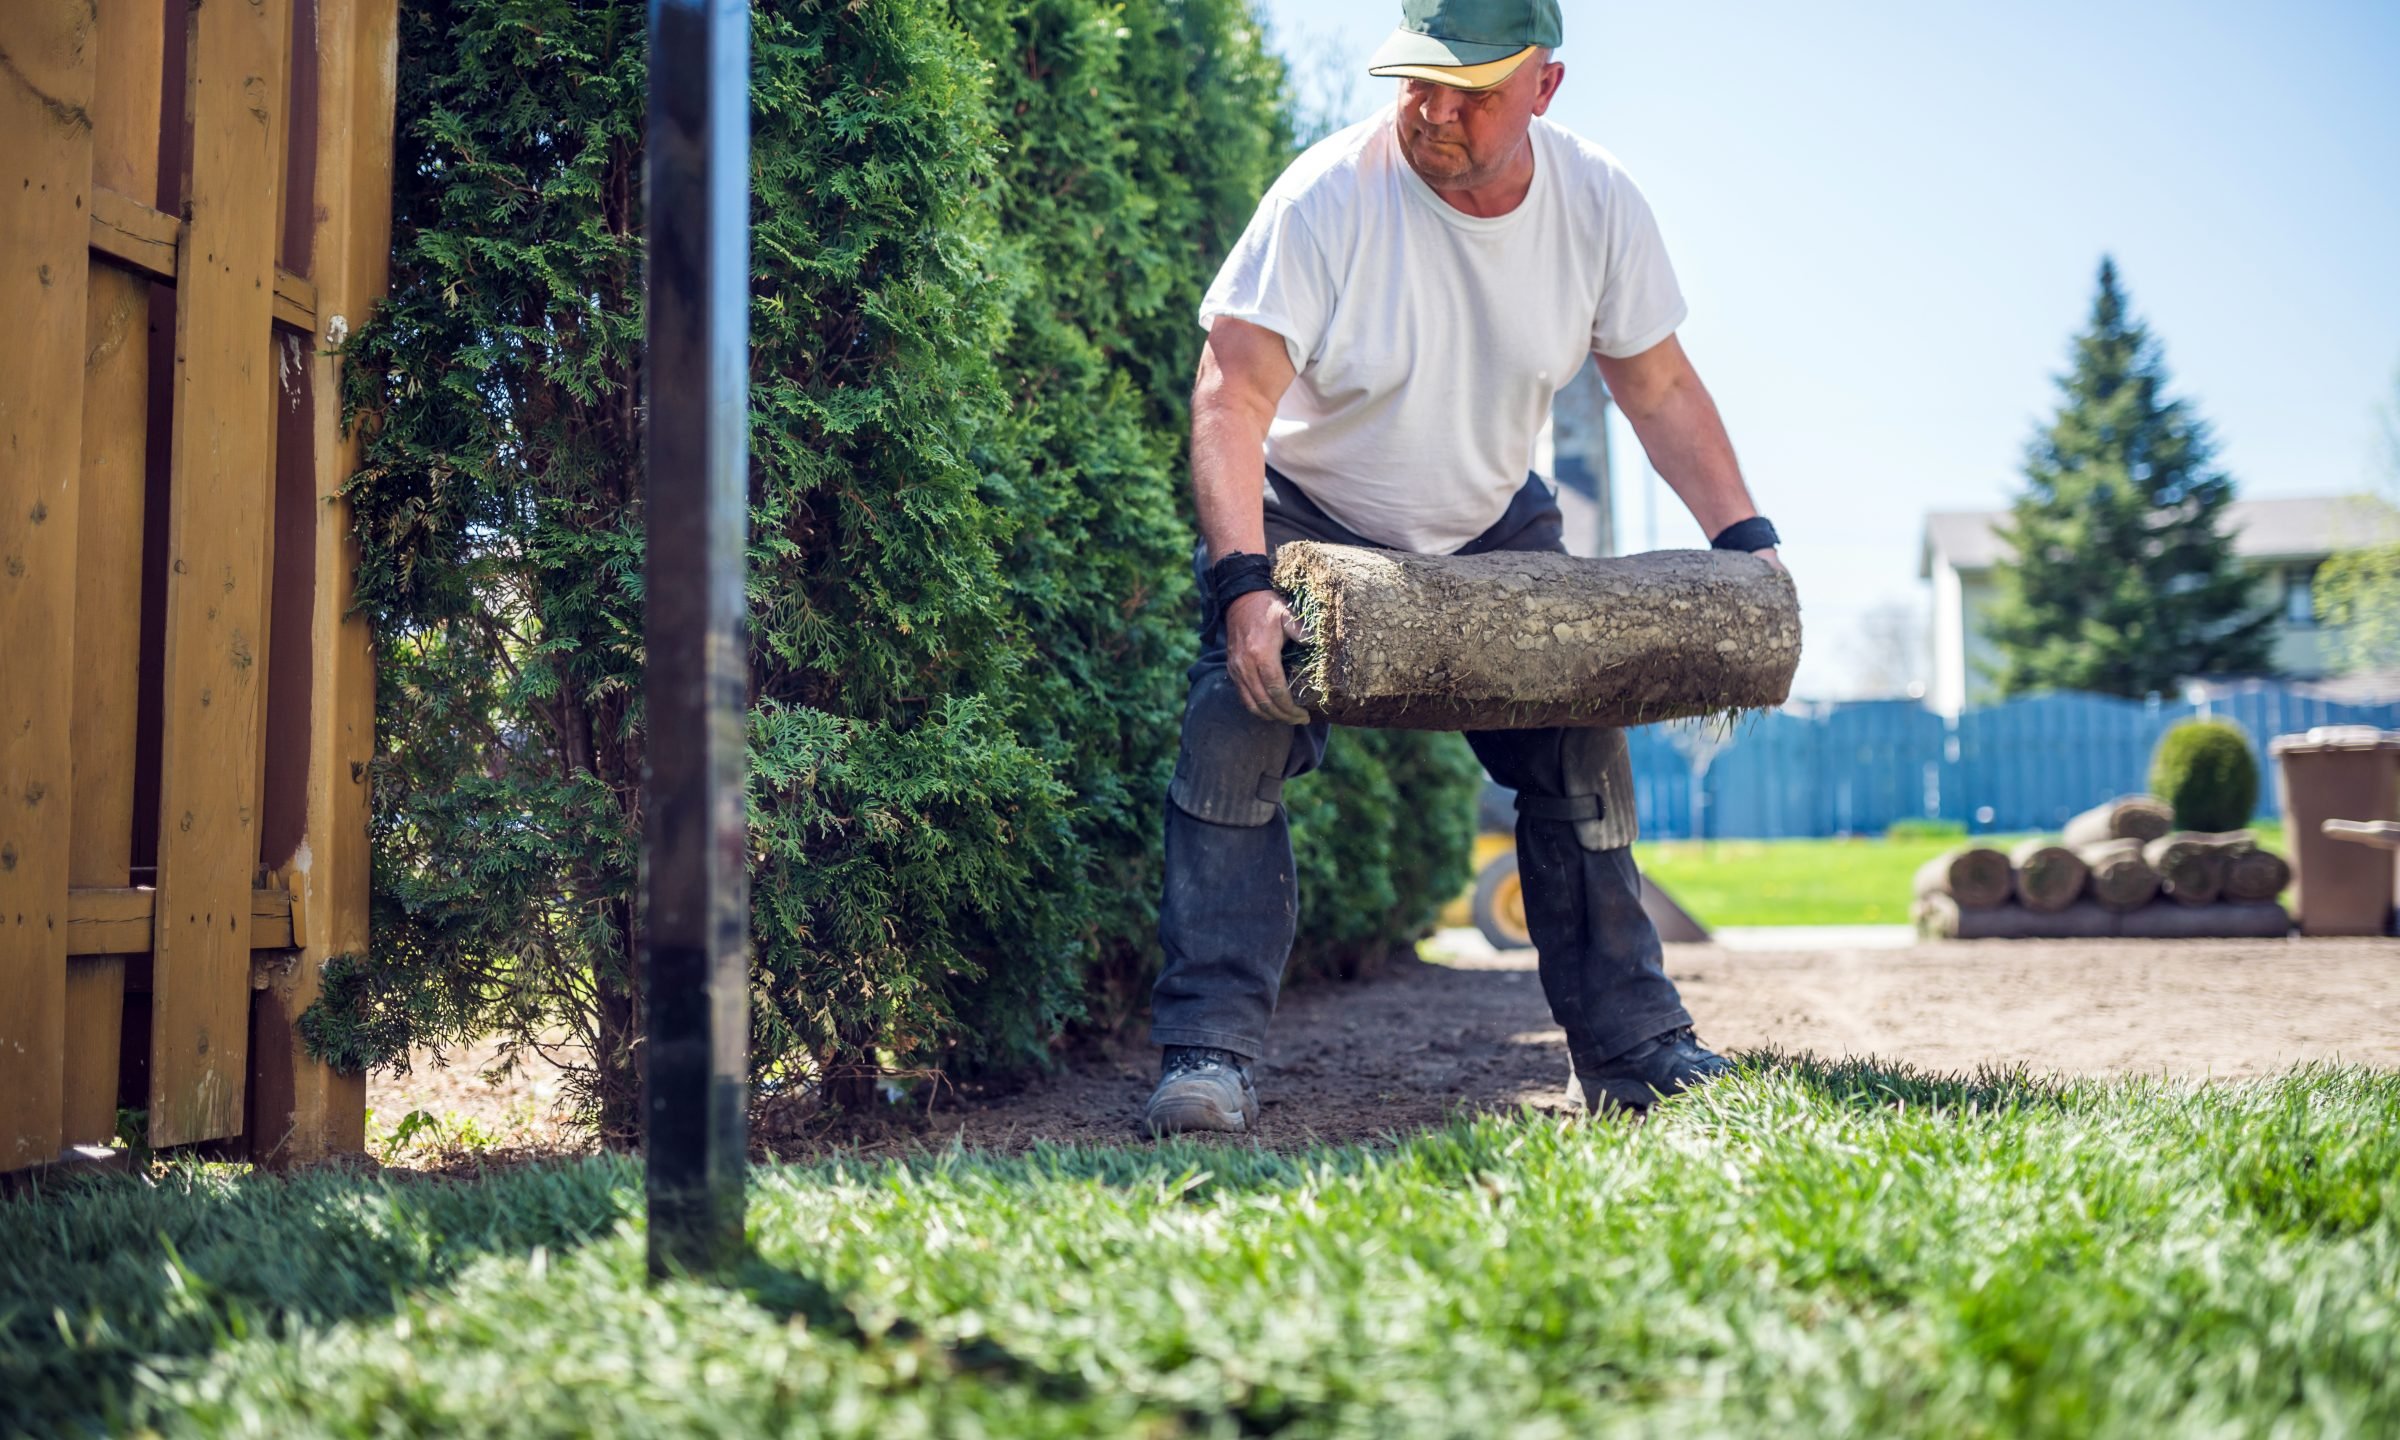 A Landscaping Or Lawn Care Business, Starting A Landscape Design Business